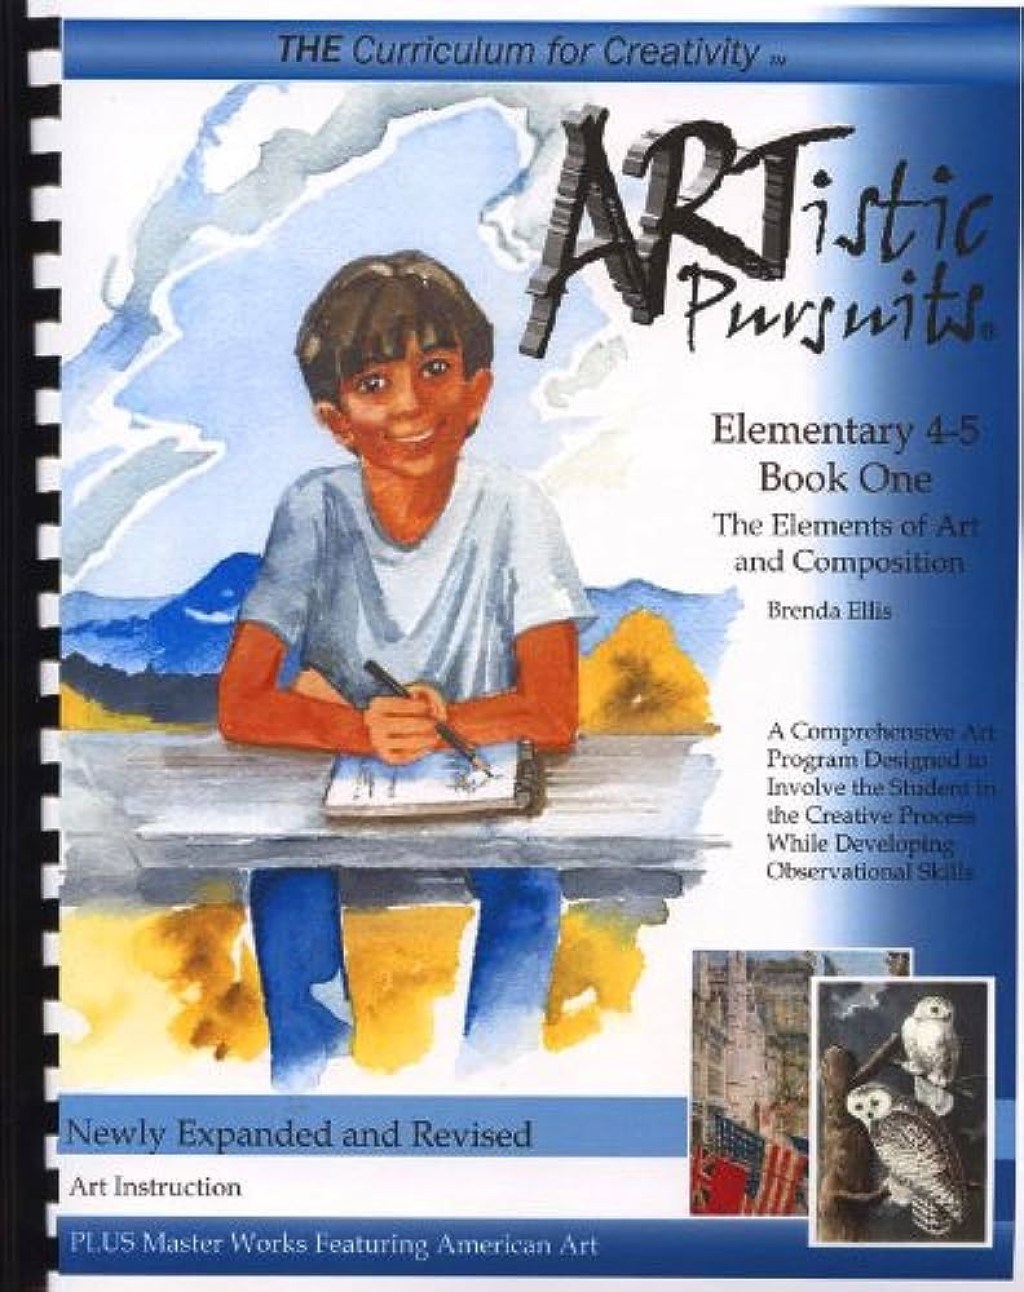 artistic pursuits elementary book one the elements of art and